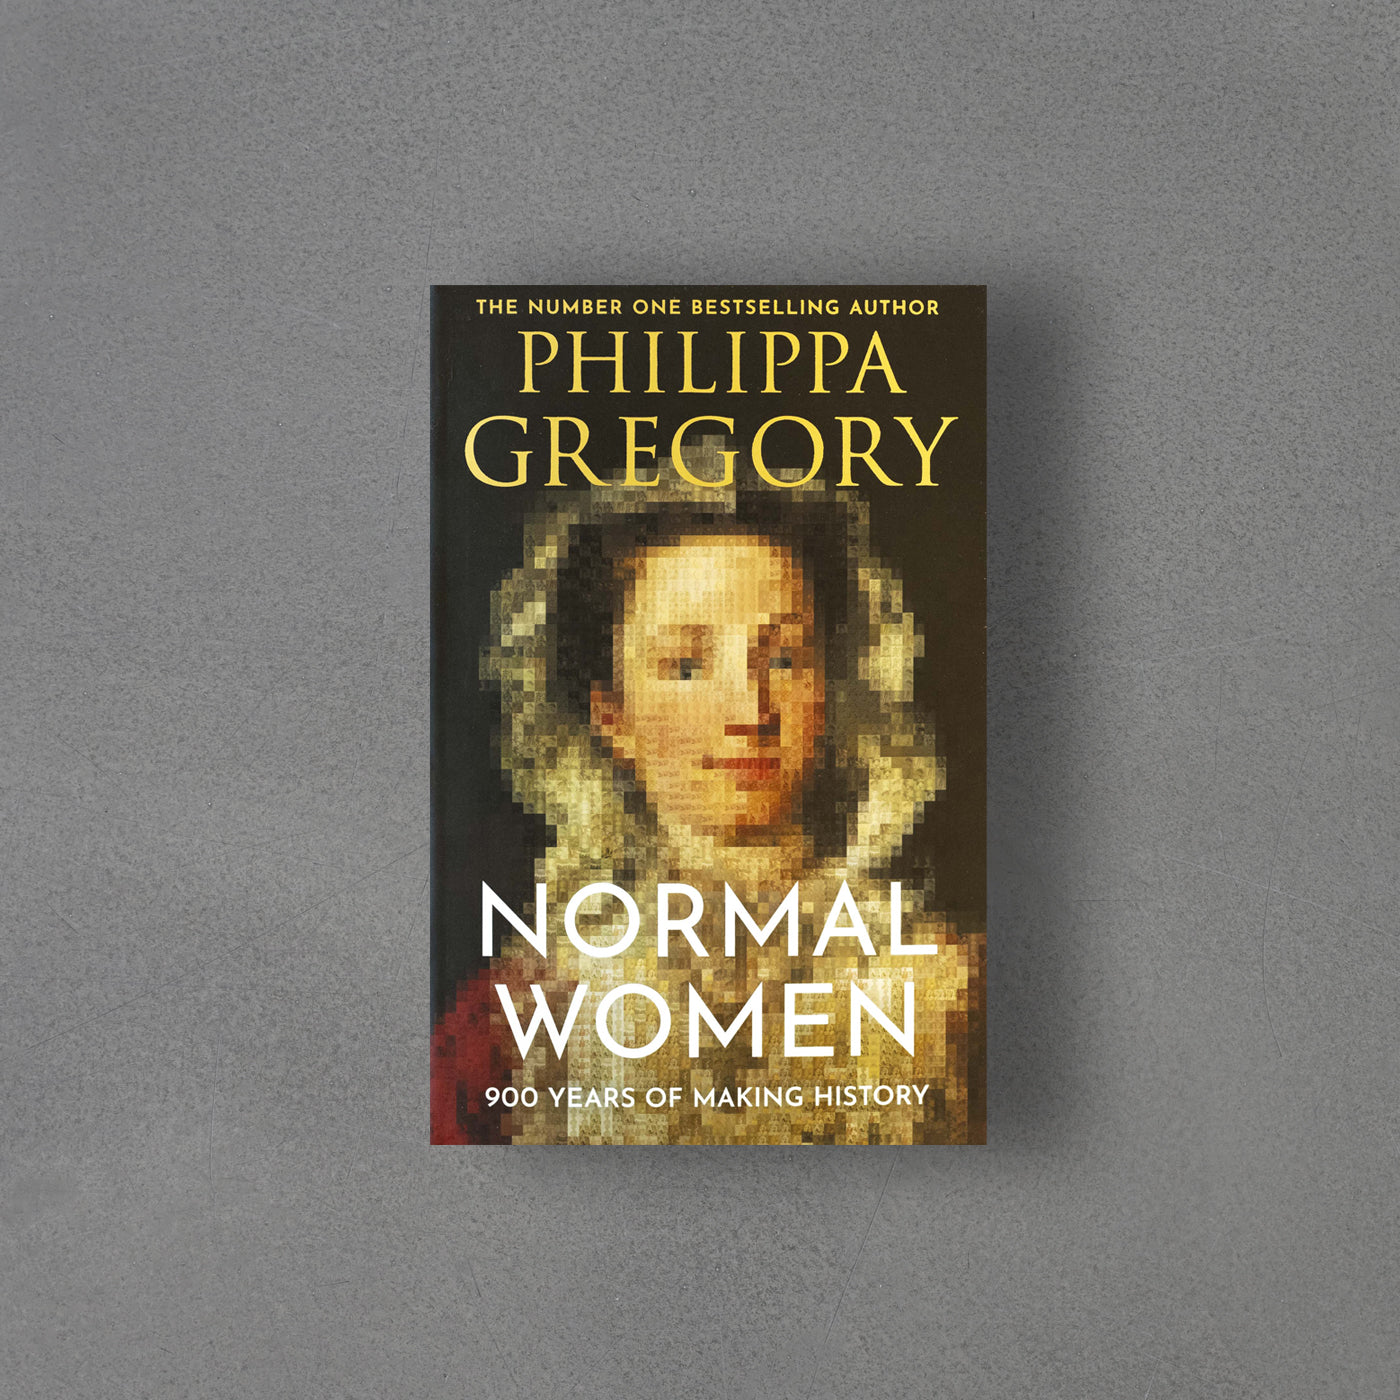 Normal Women - 900 Years of Making History